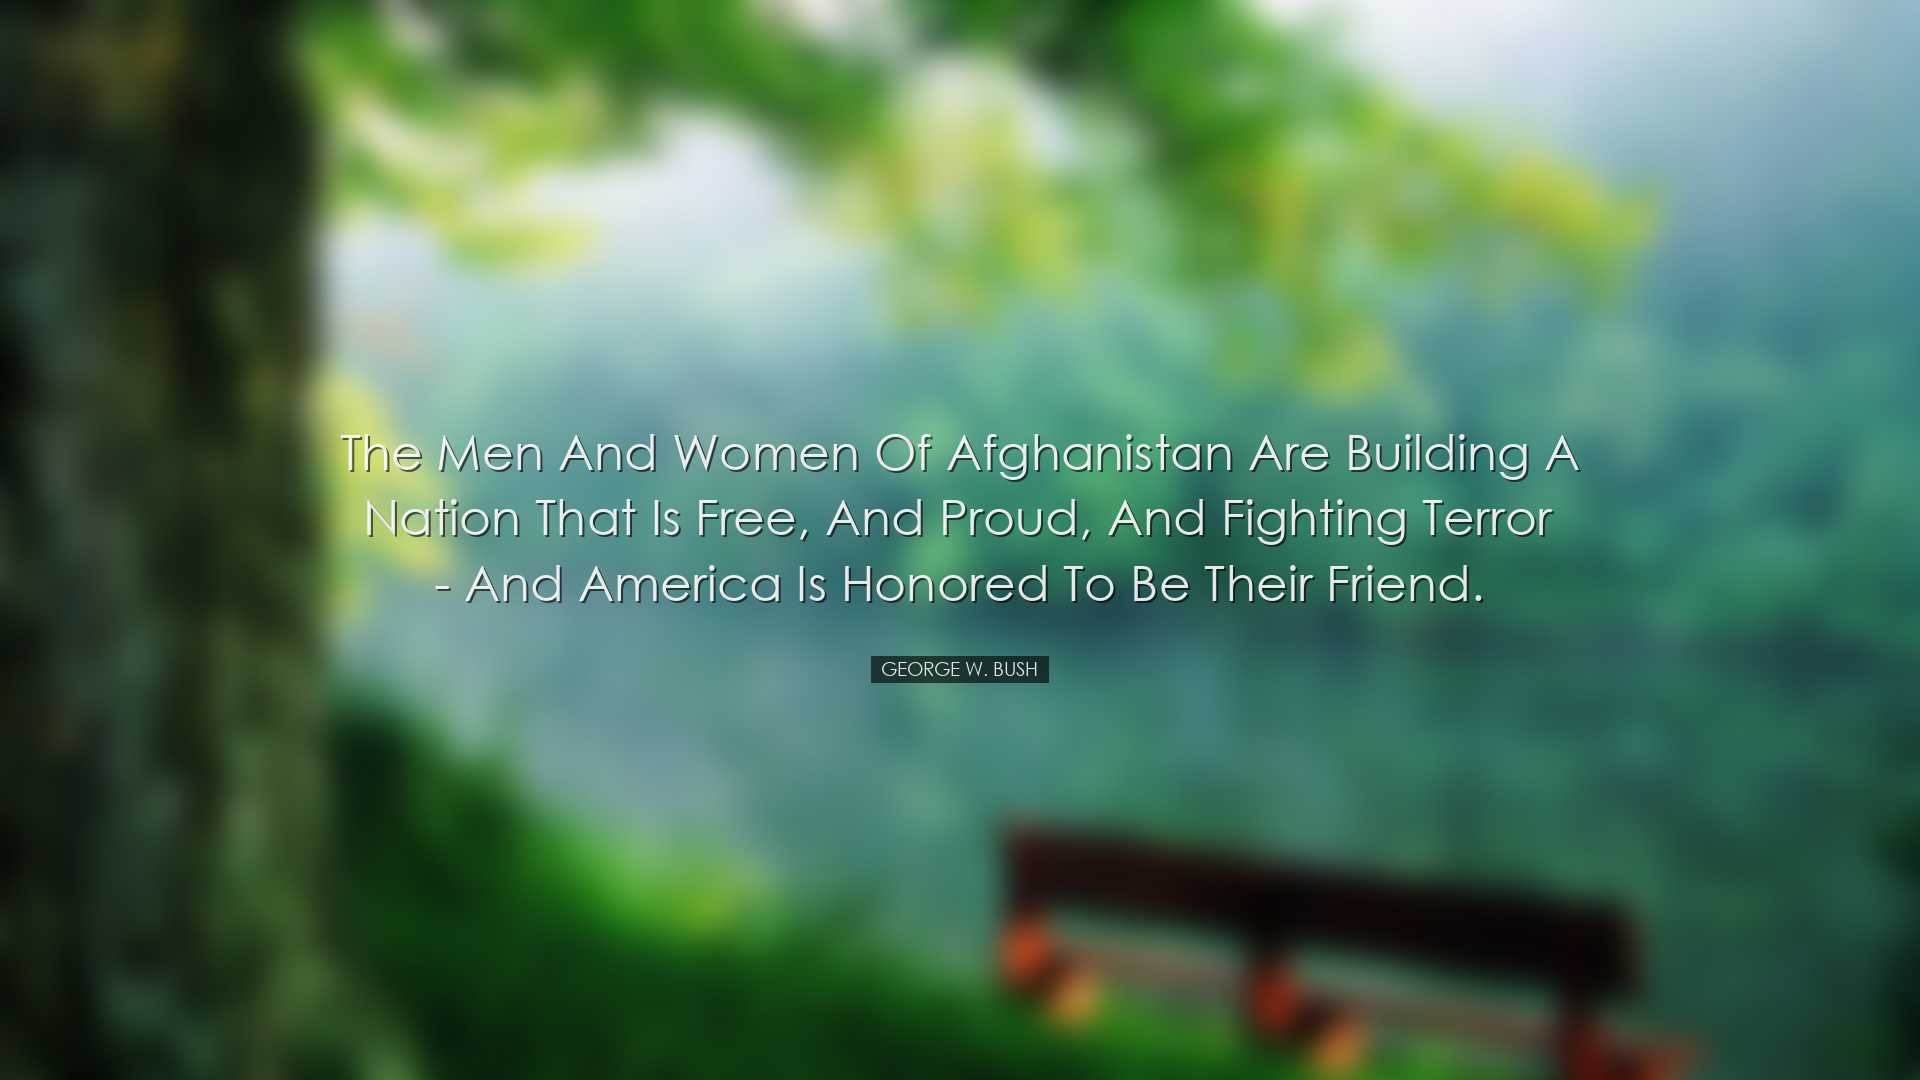 The men and women of Afghanistan are building a nation that is fre